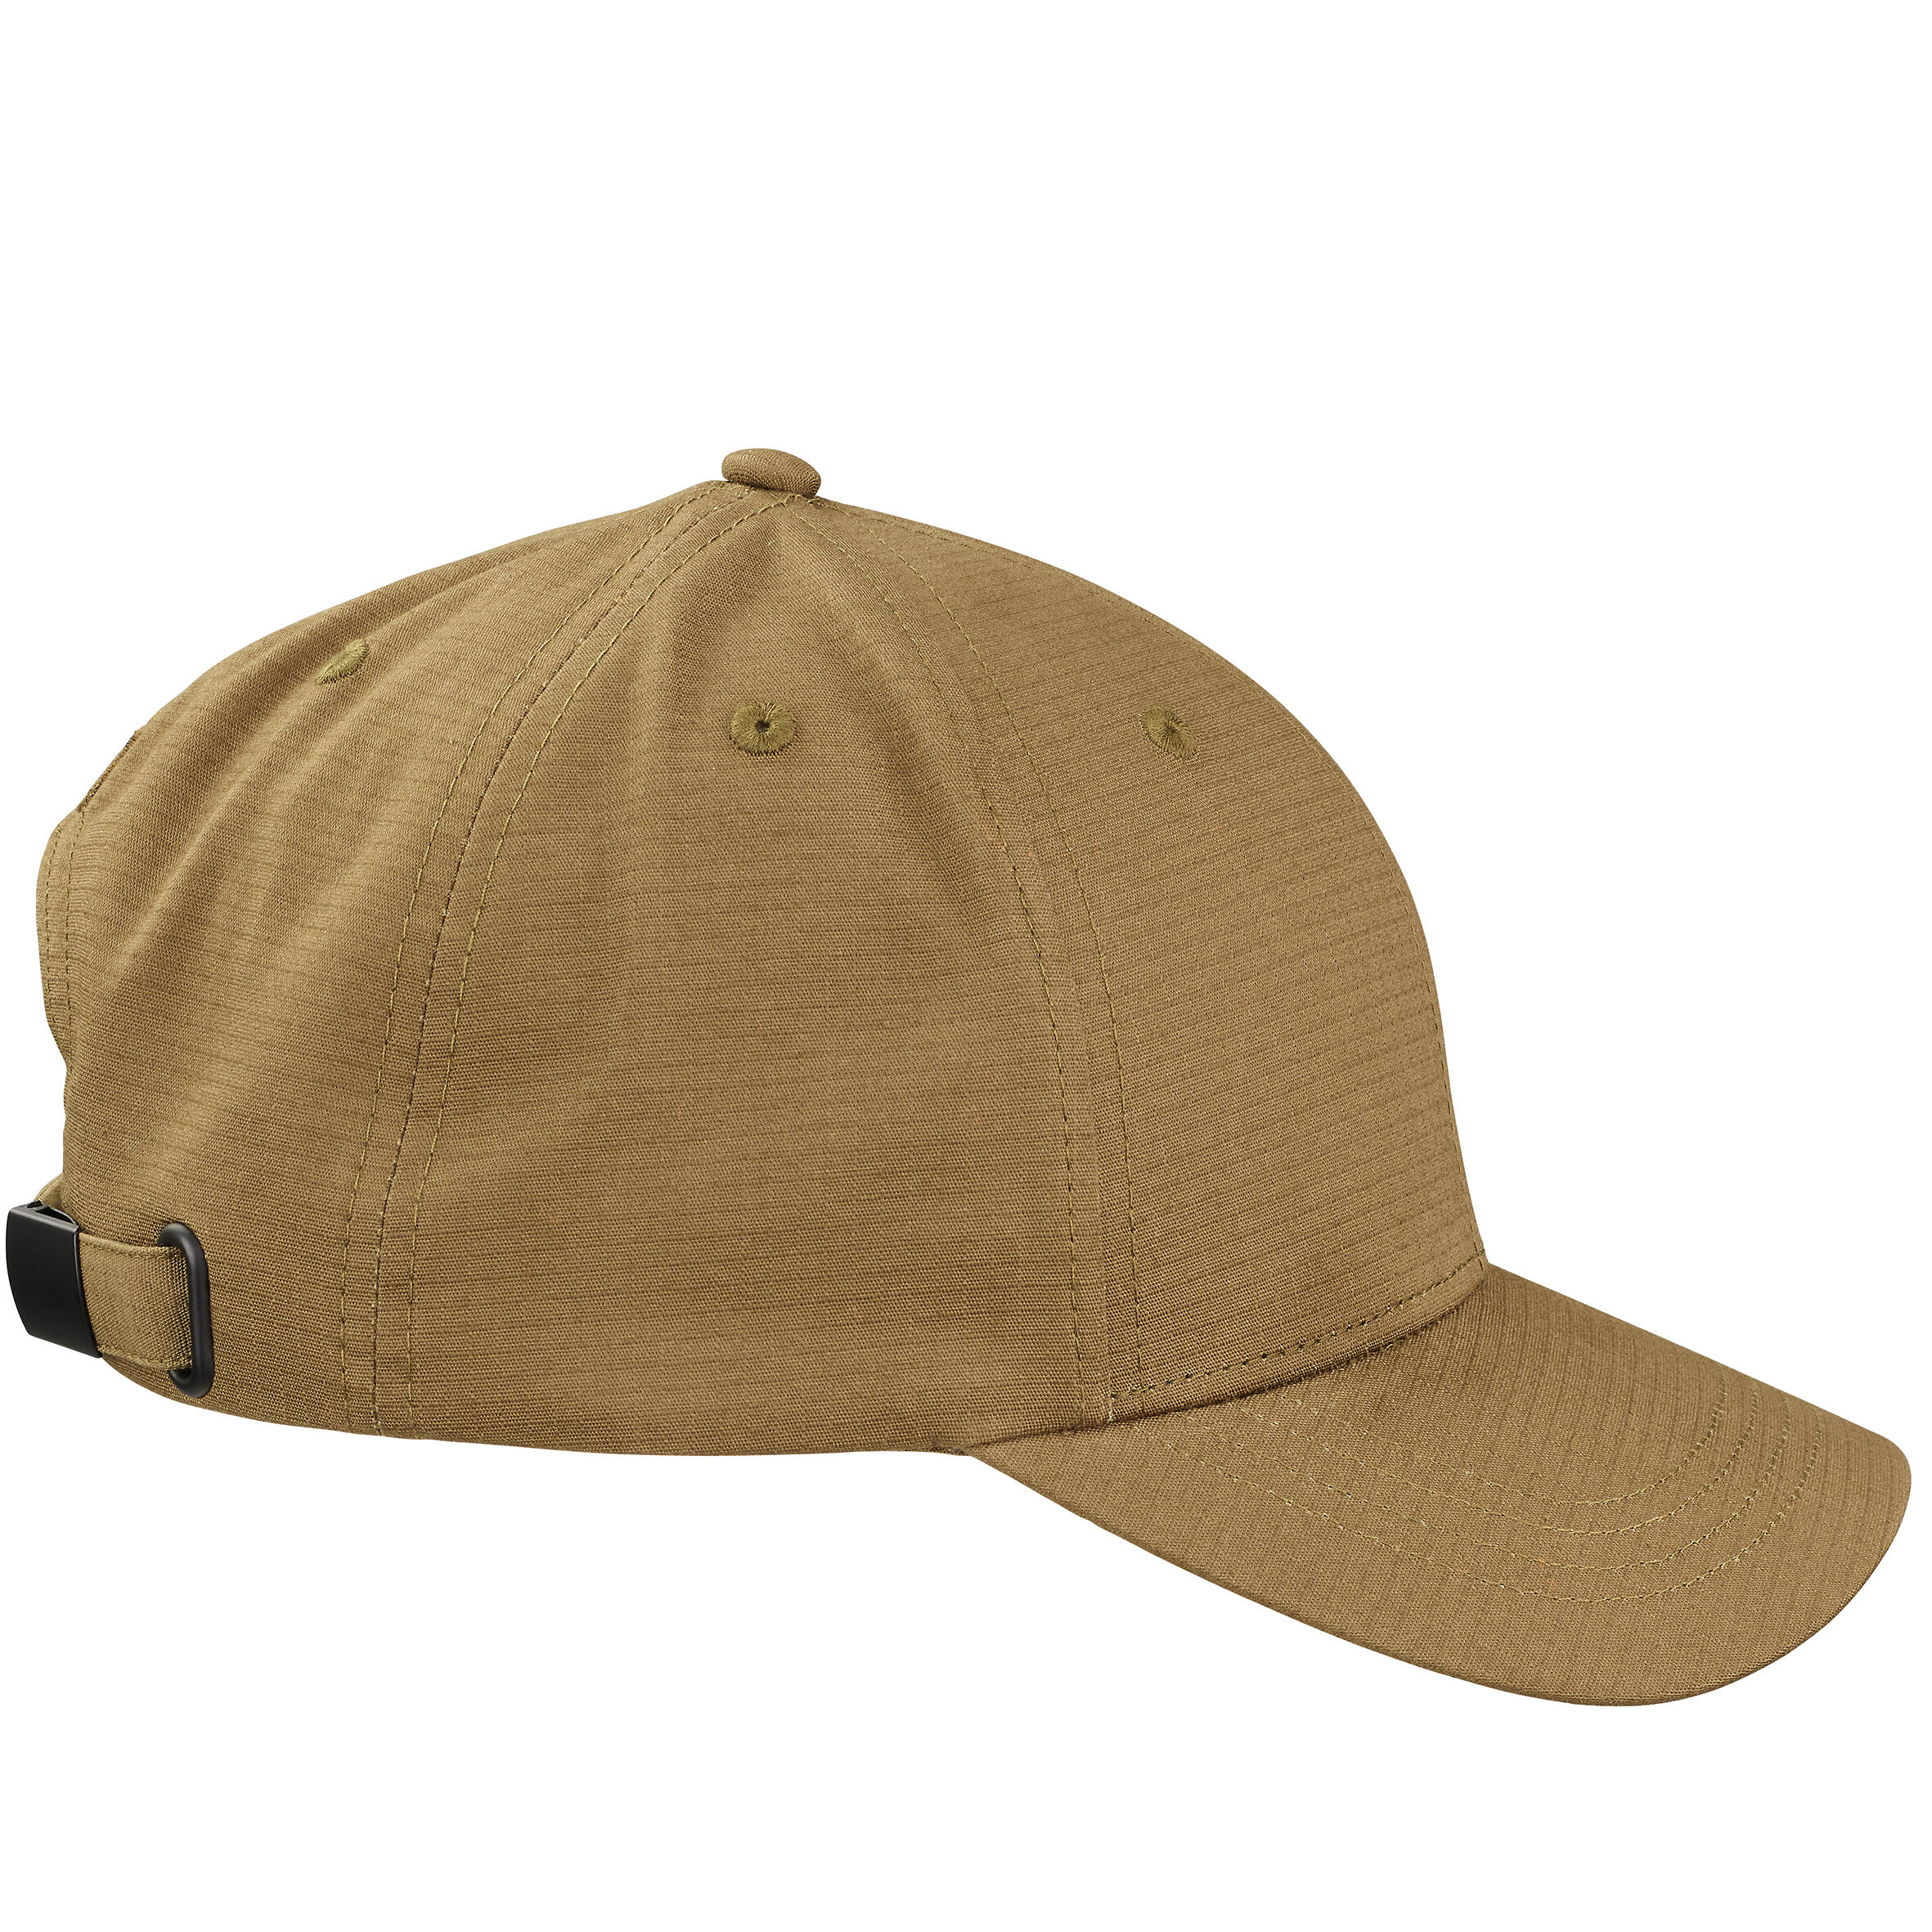 Durable Country Sport Cap 500 - Olive Green 6/10